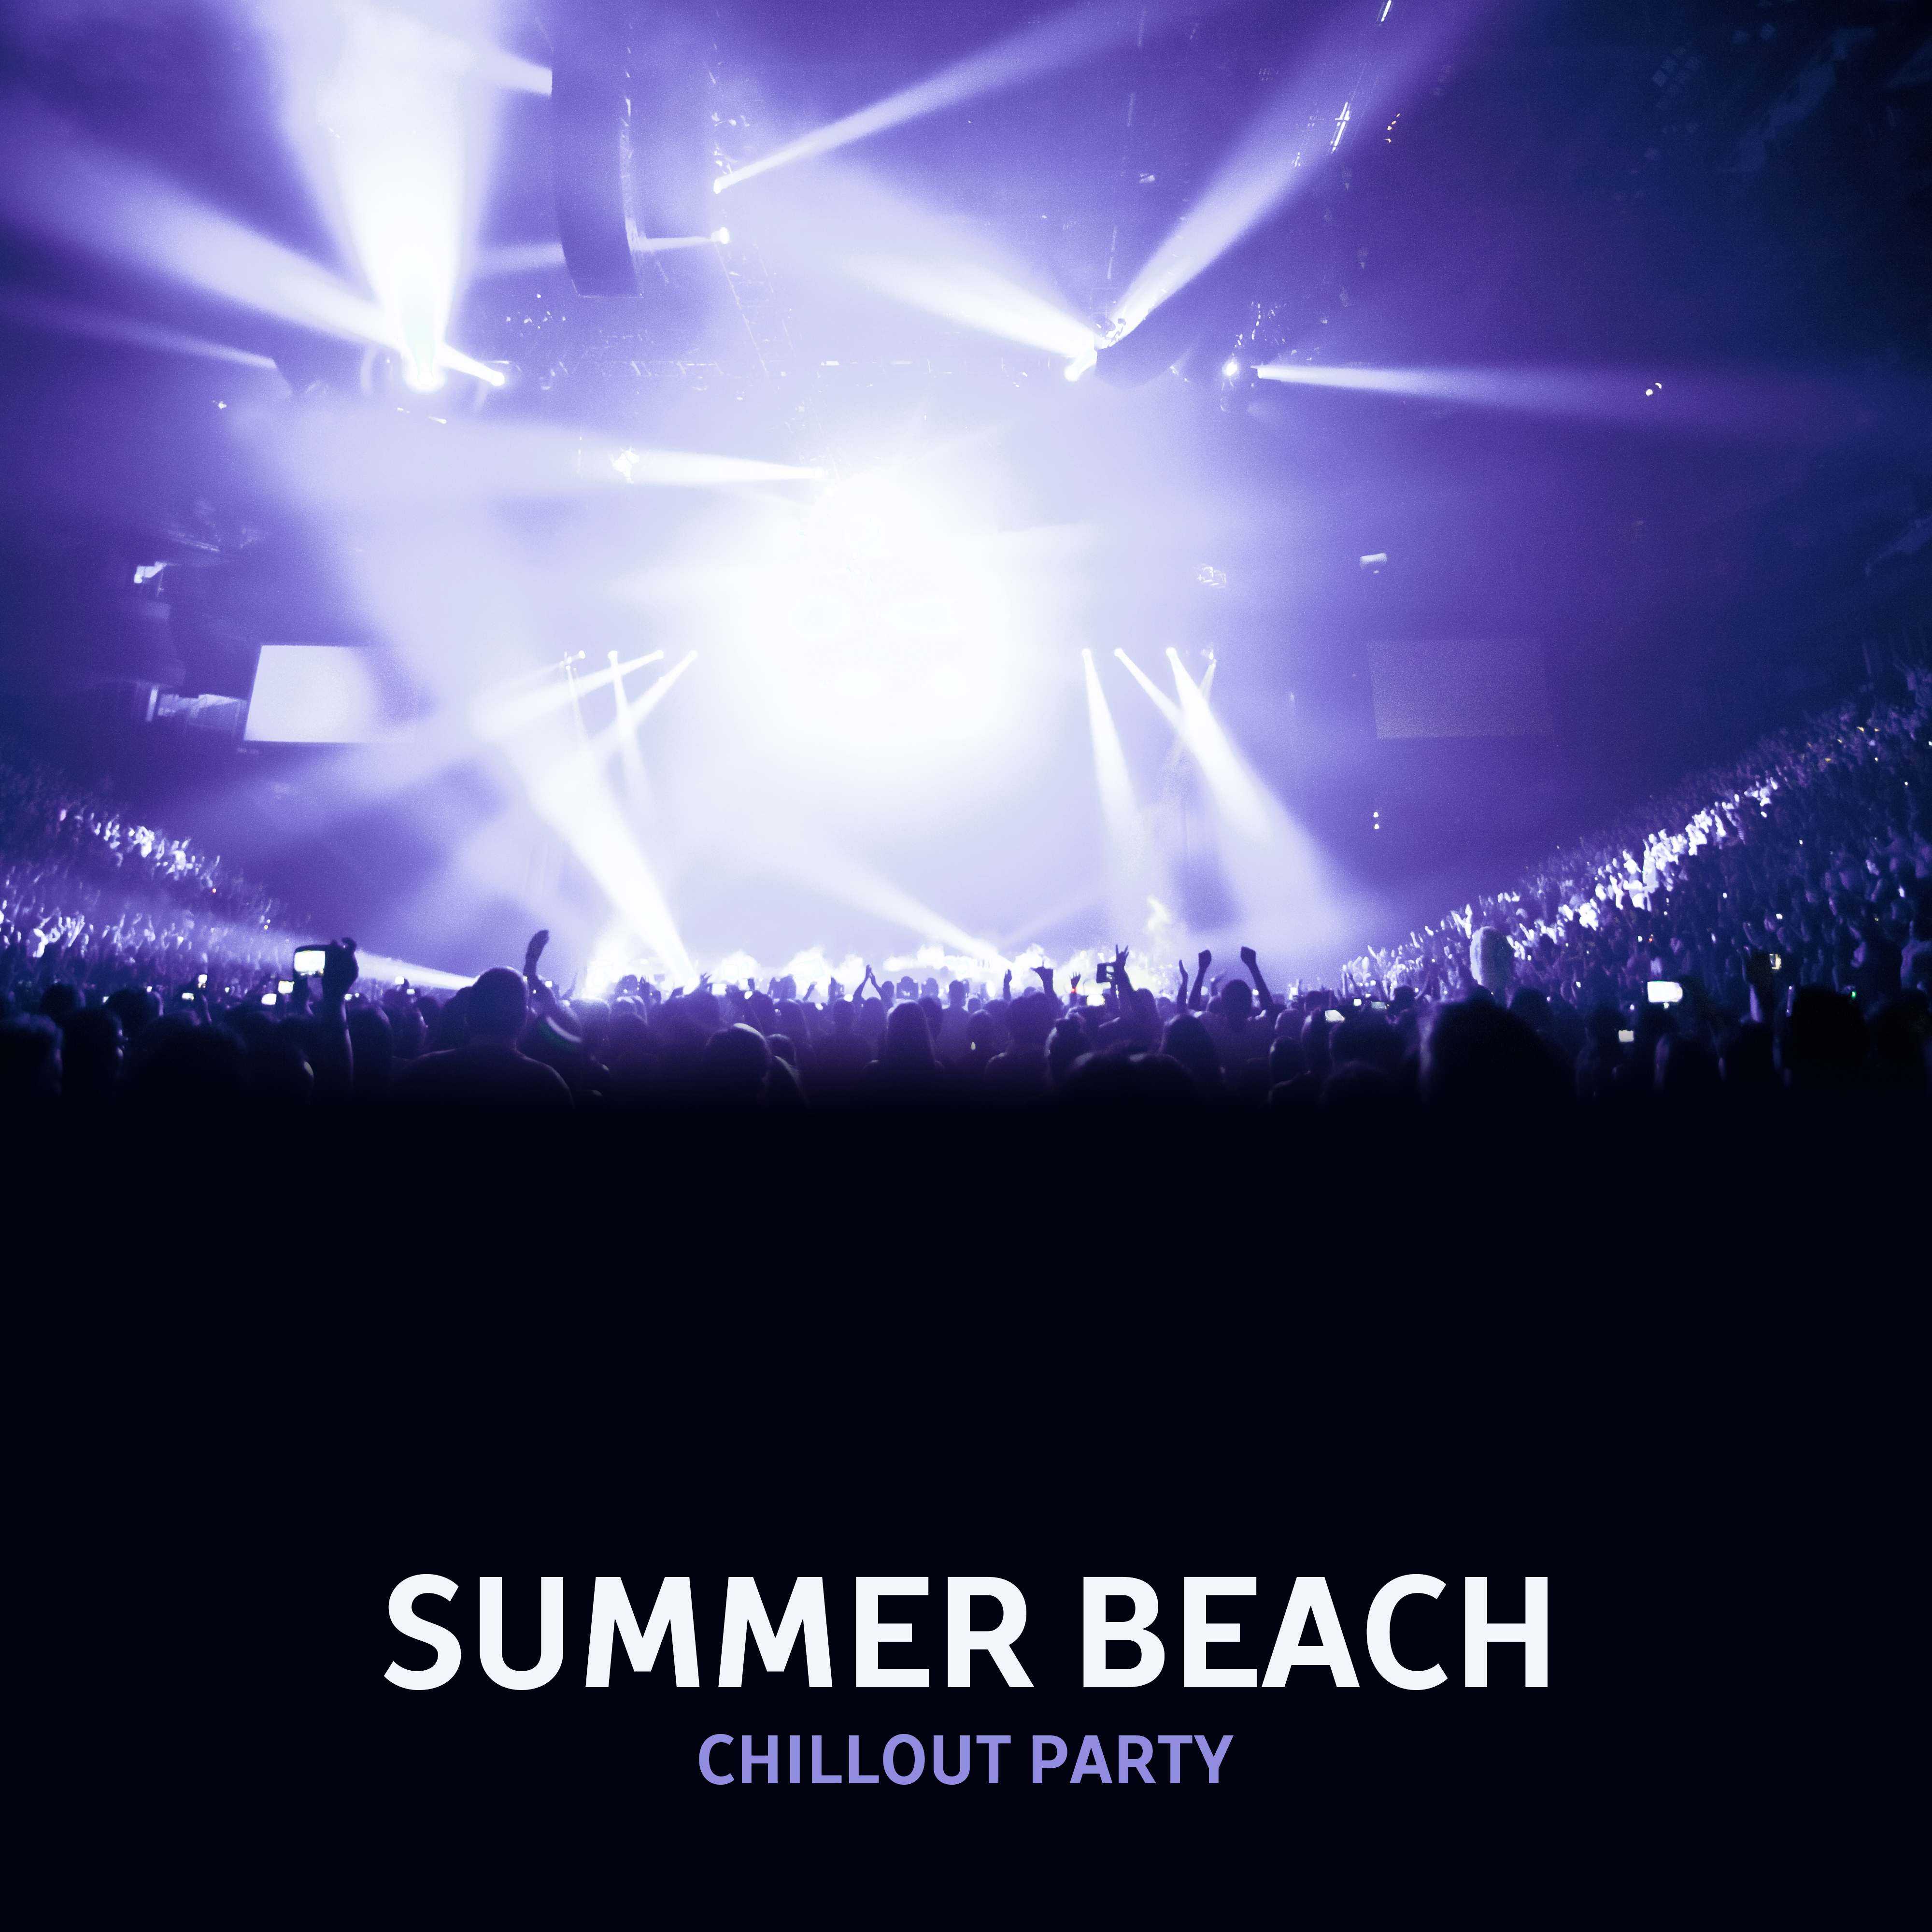 Summer Beach Chillout Party